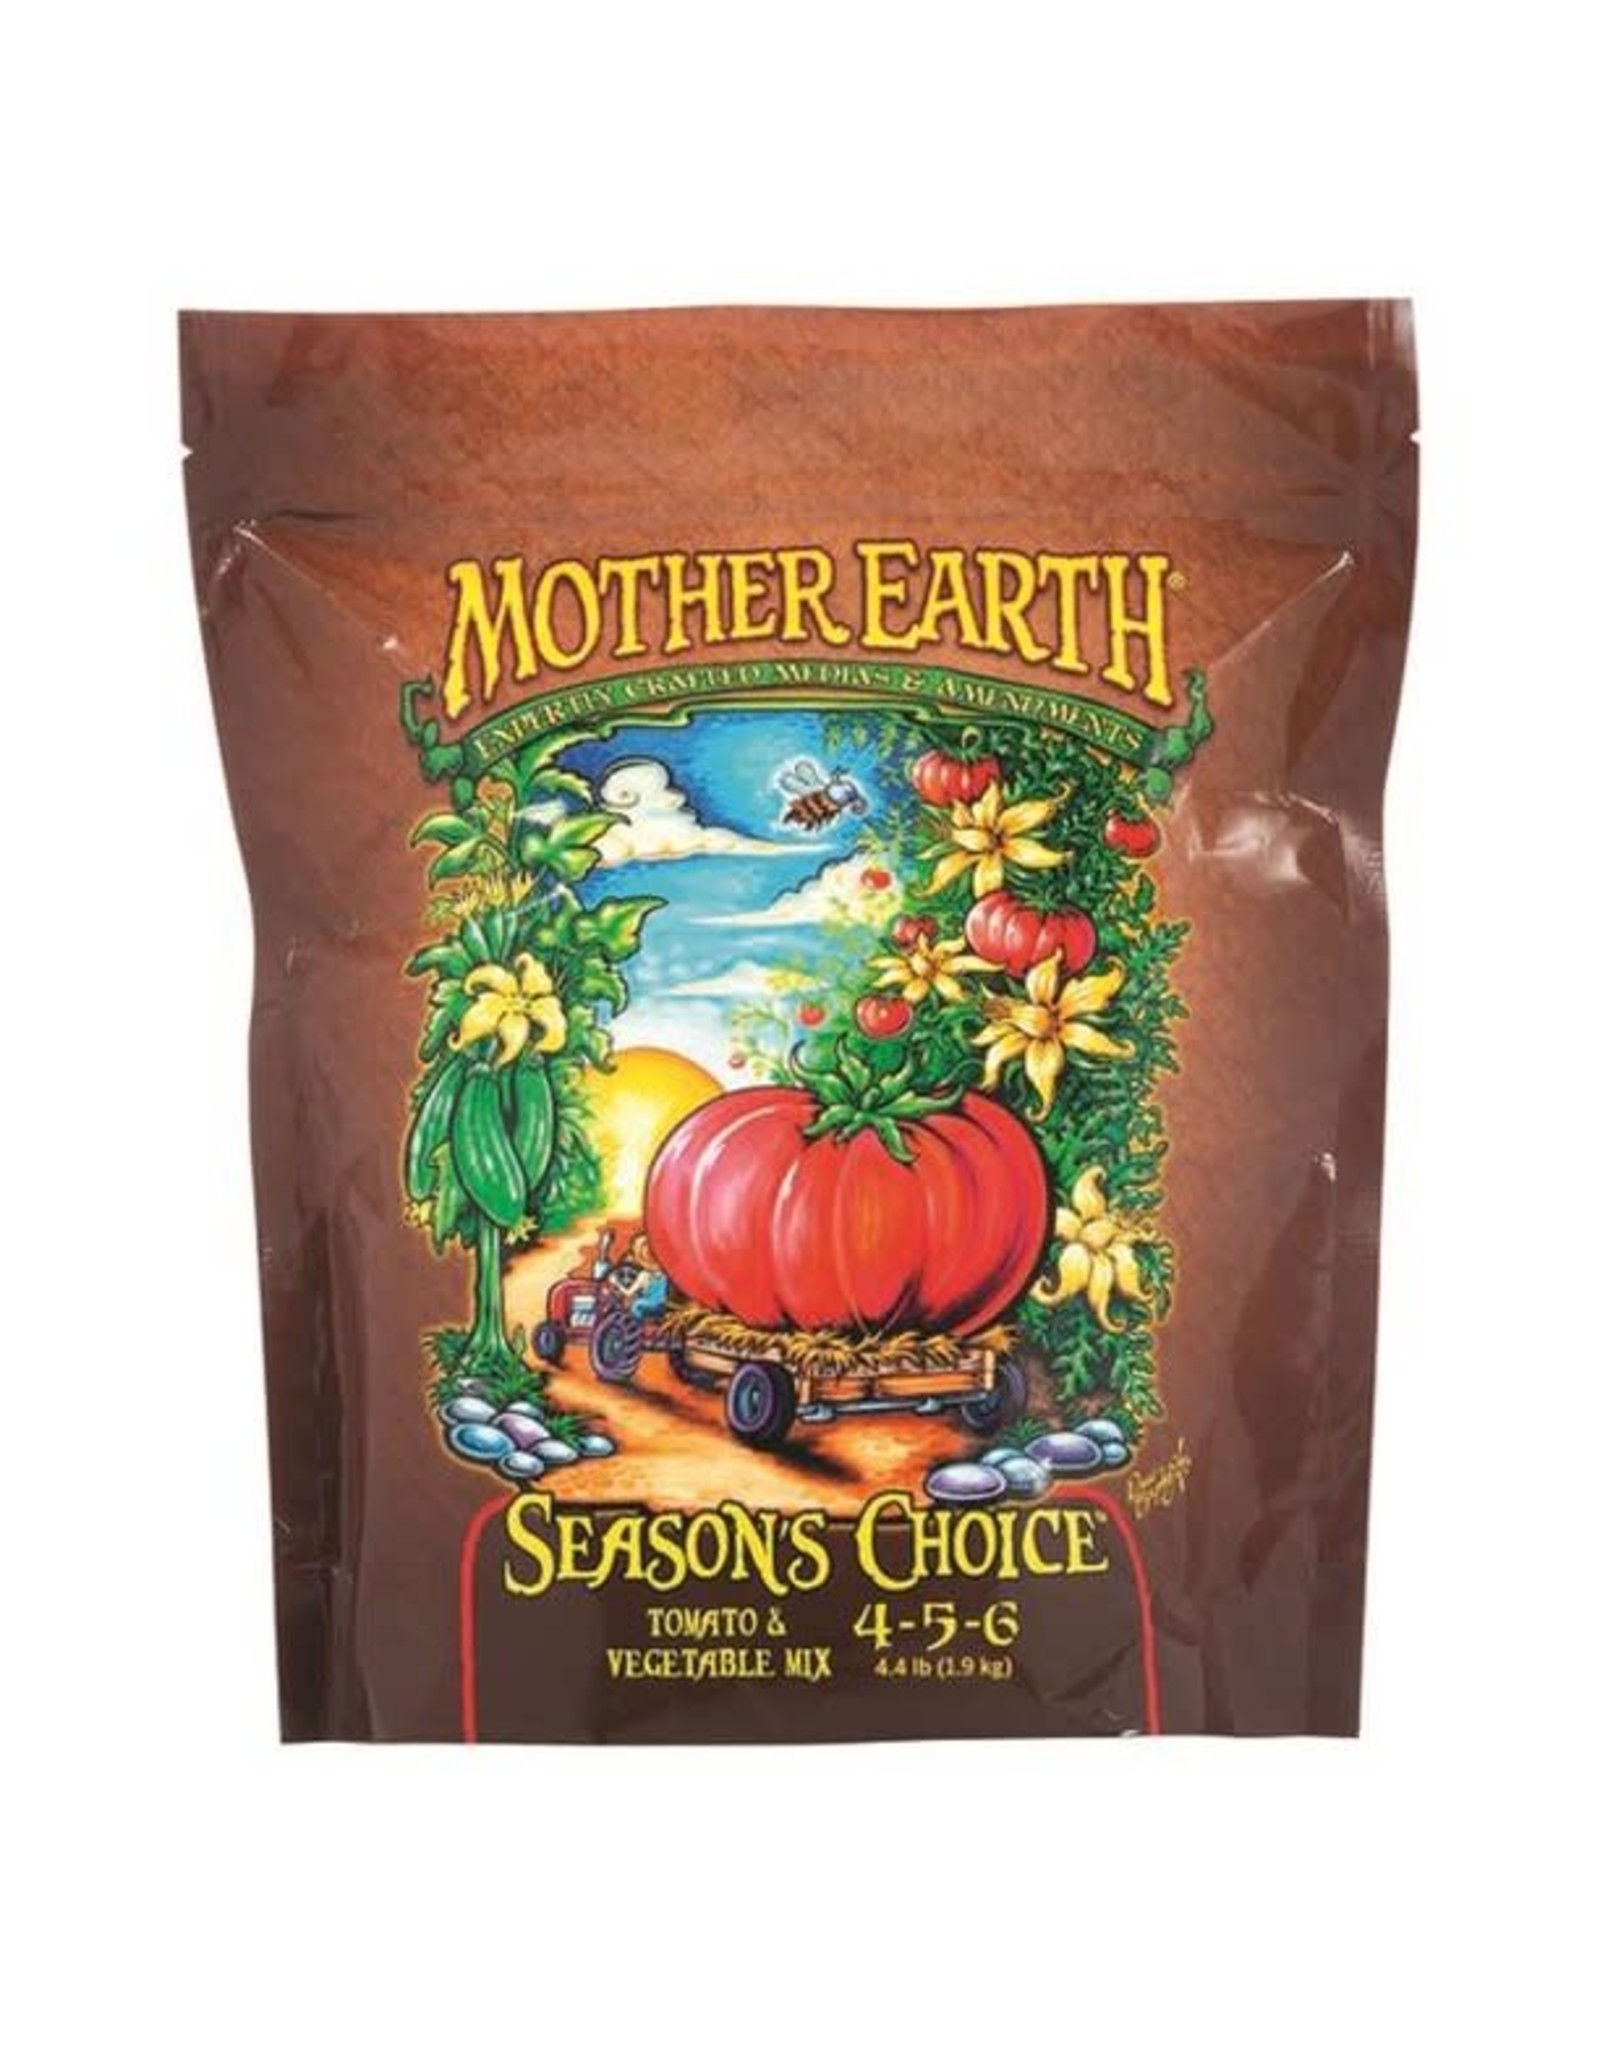 Mother Earth Mother Earth Season's Choice Tomato & Vegetable Mix 4-5-6